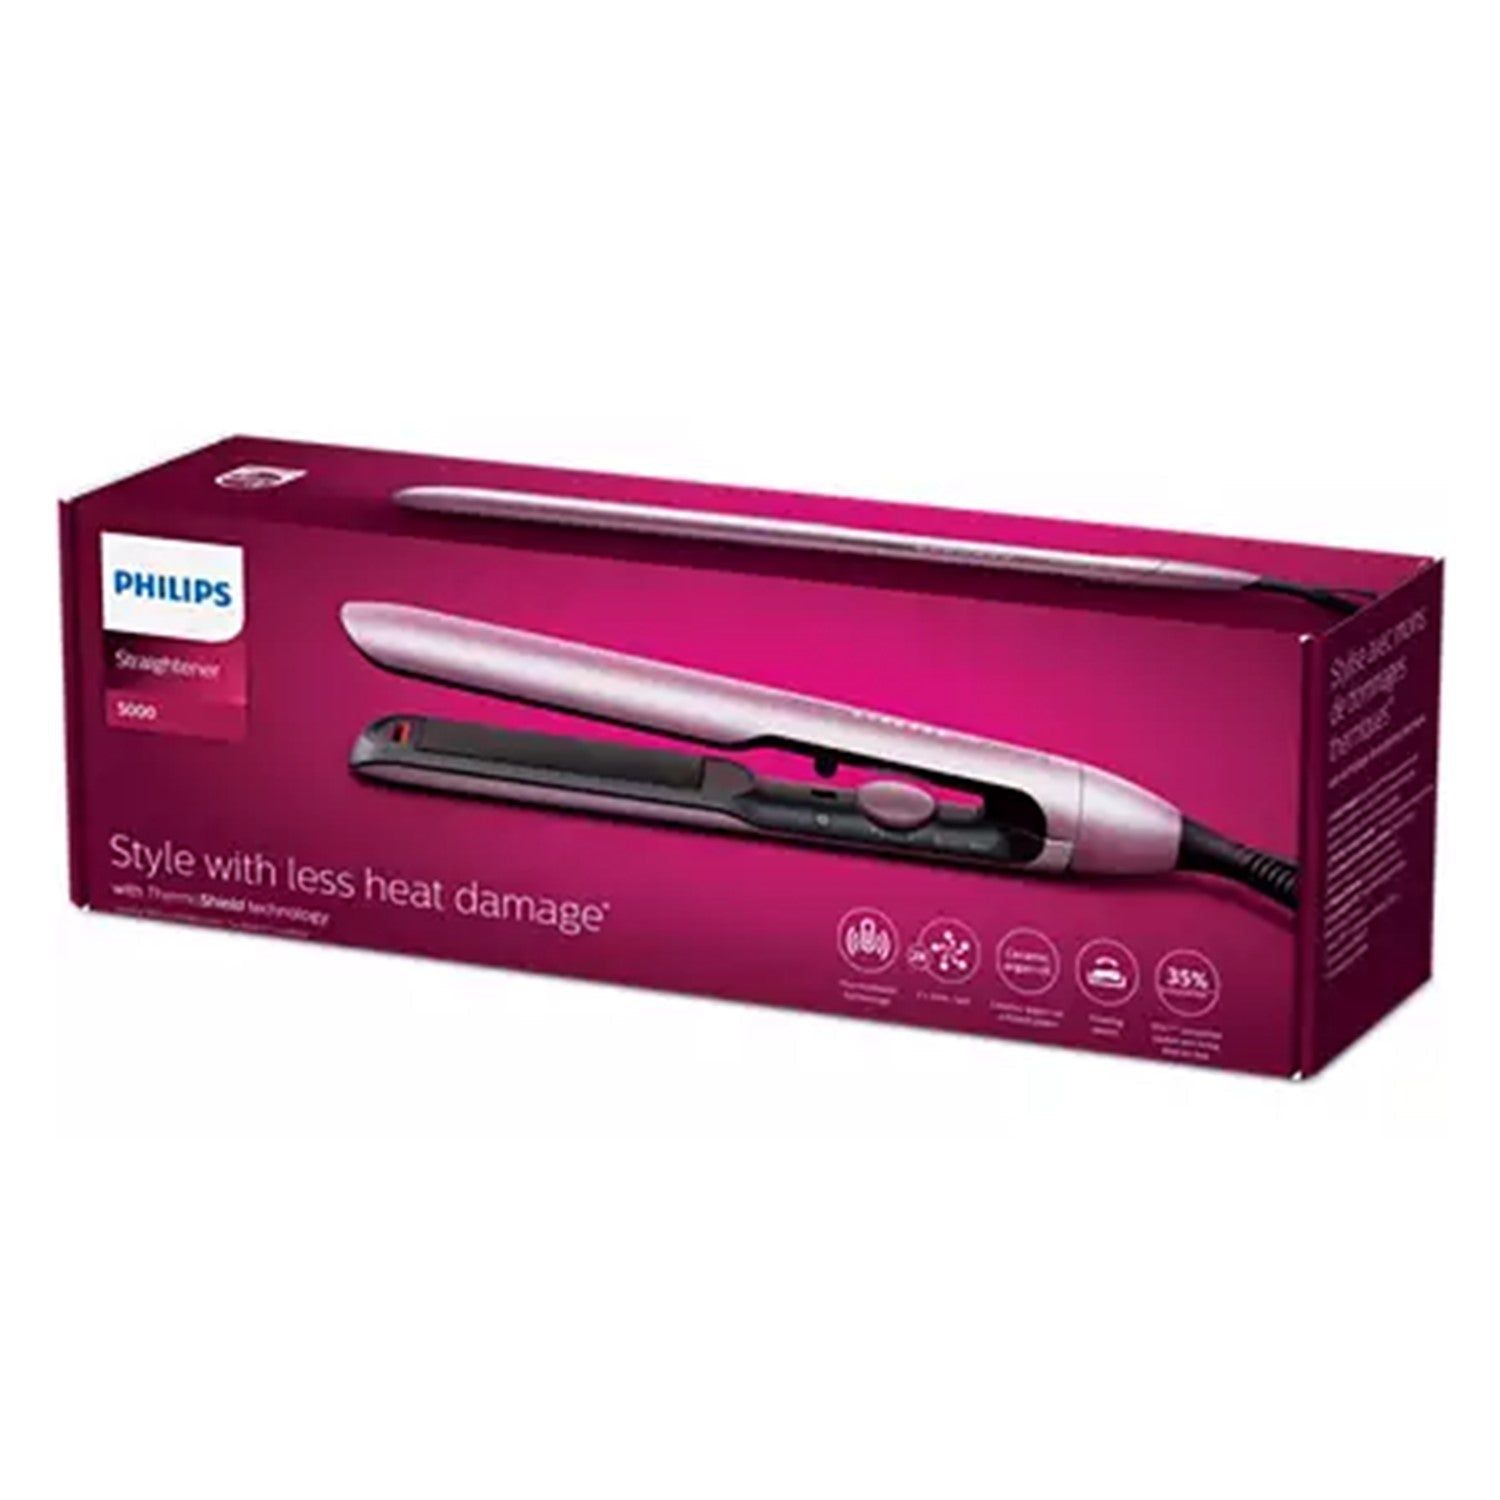 Philips 5000 series BHS530/00 hair styling tool Straightening iron Warm Silver 1.8 m_3